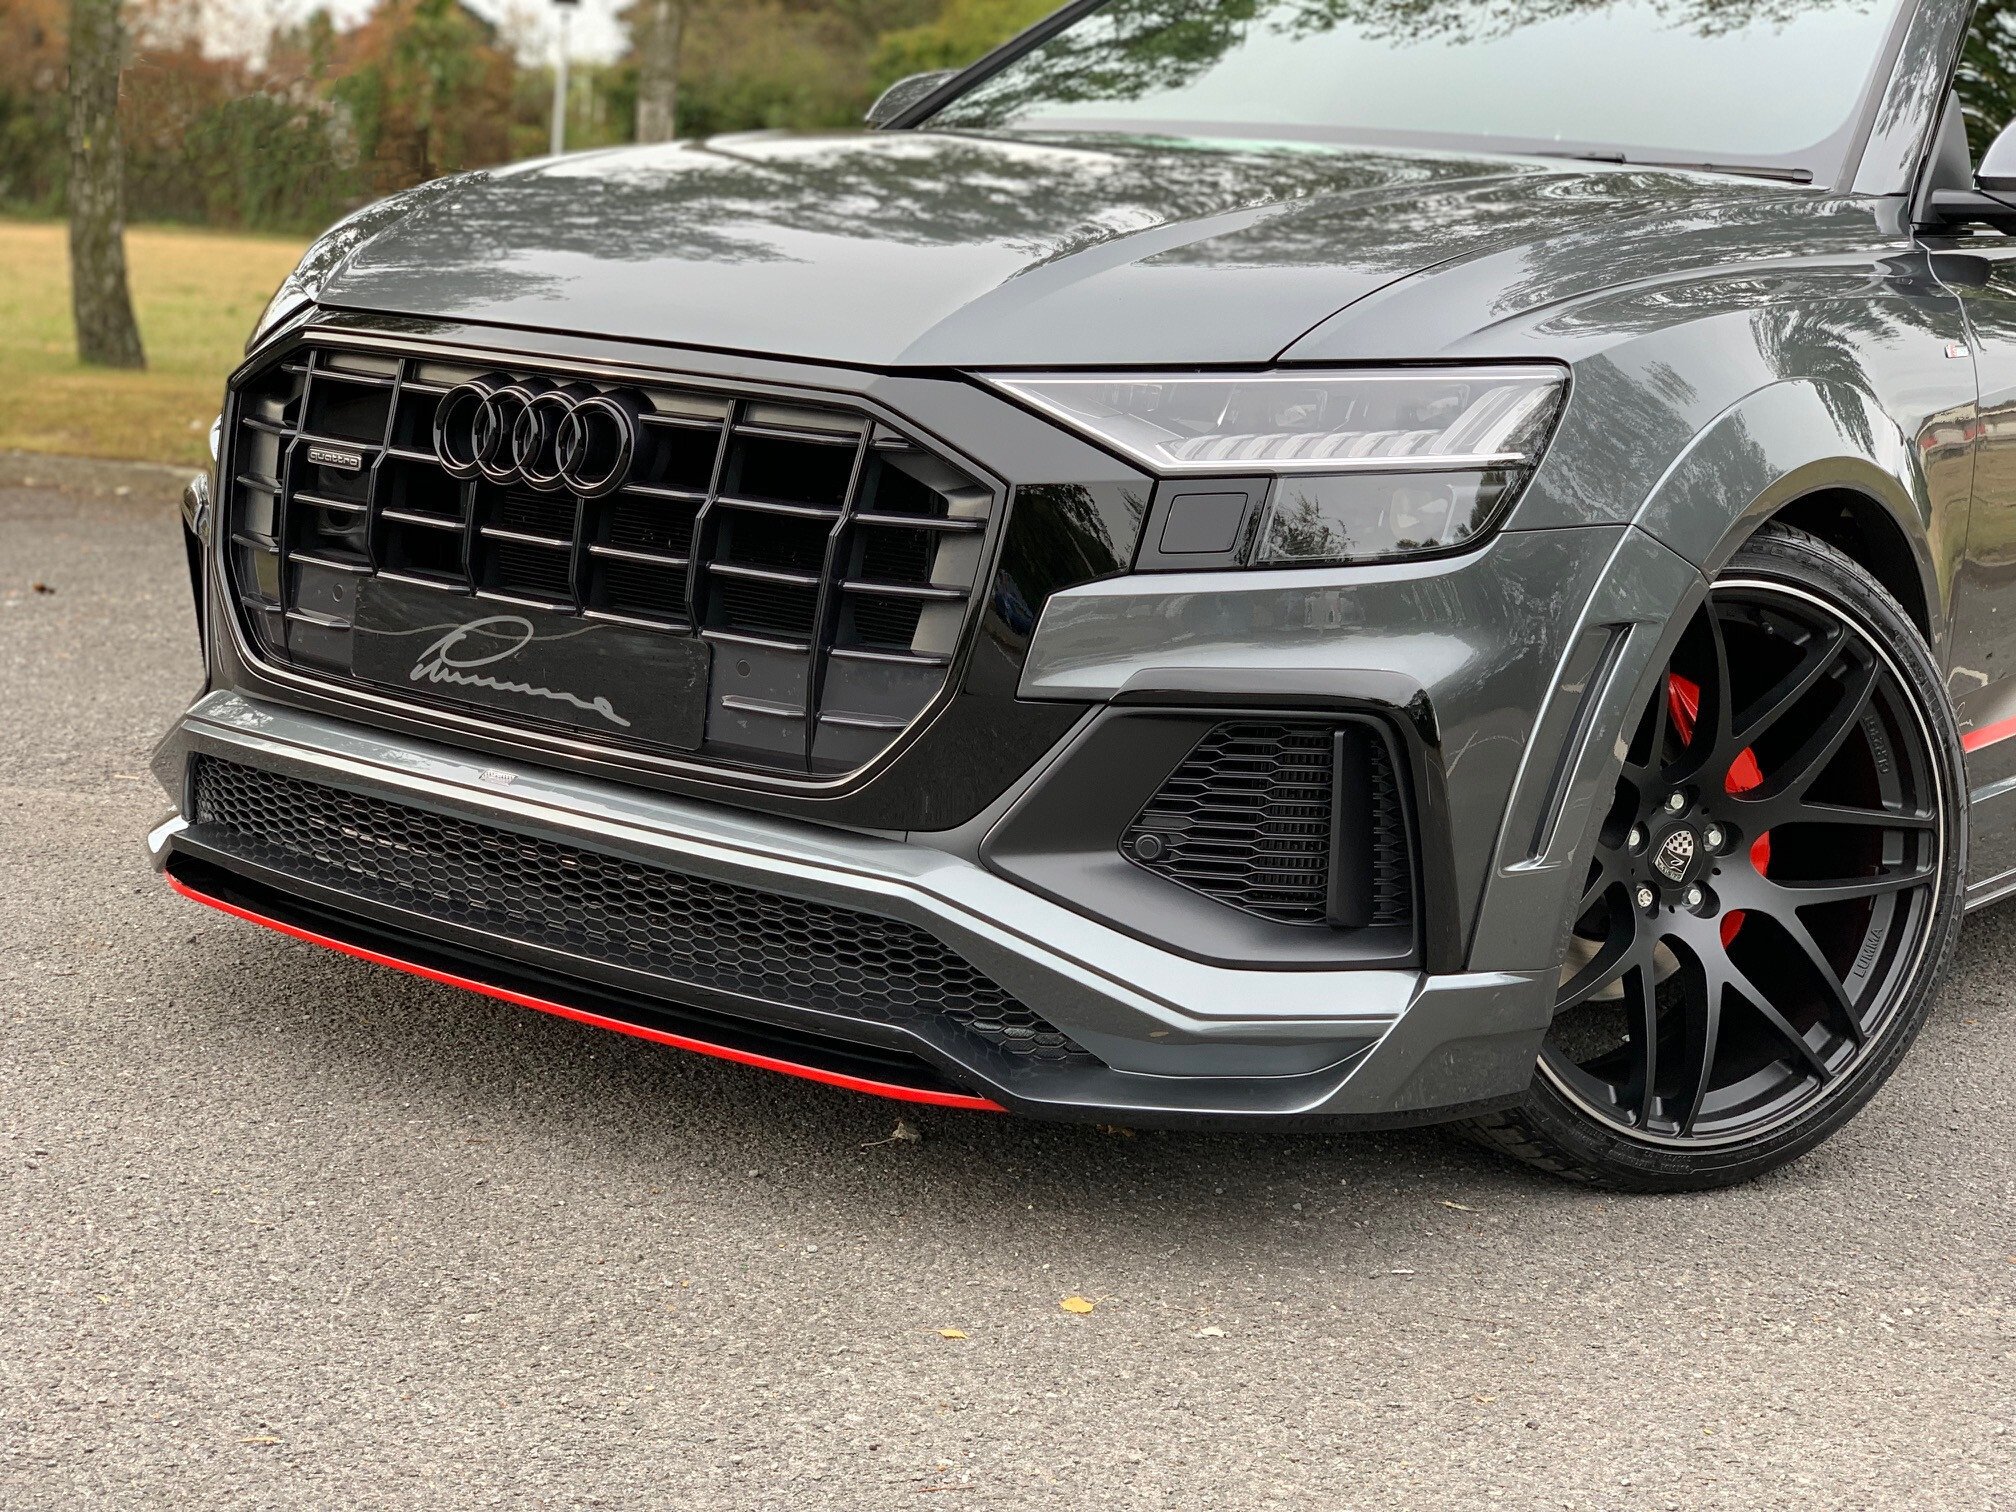 Check our price and buy Lumma CLR 8S body kit for Audi Q8